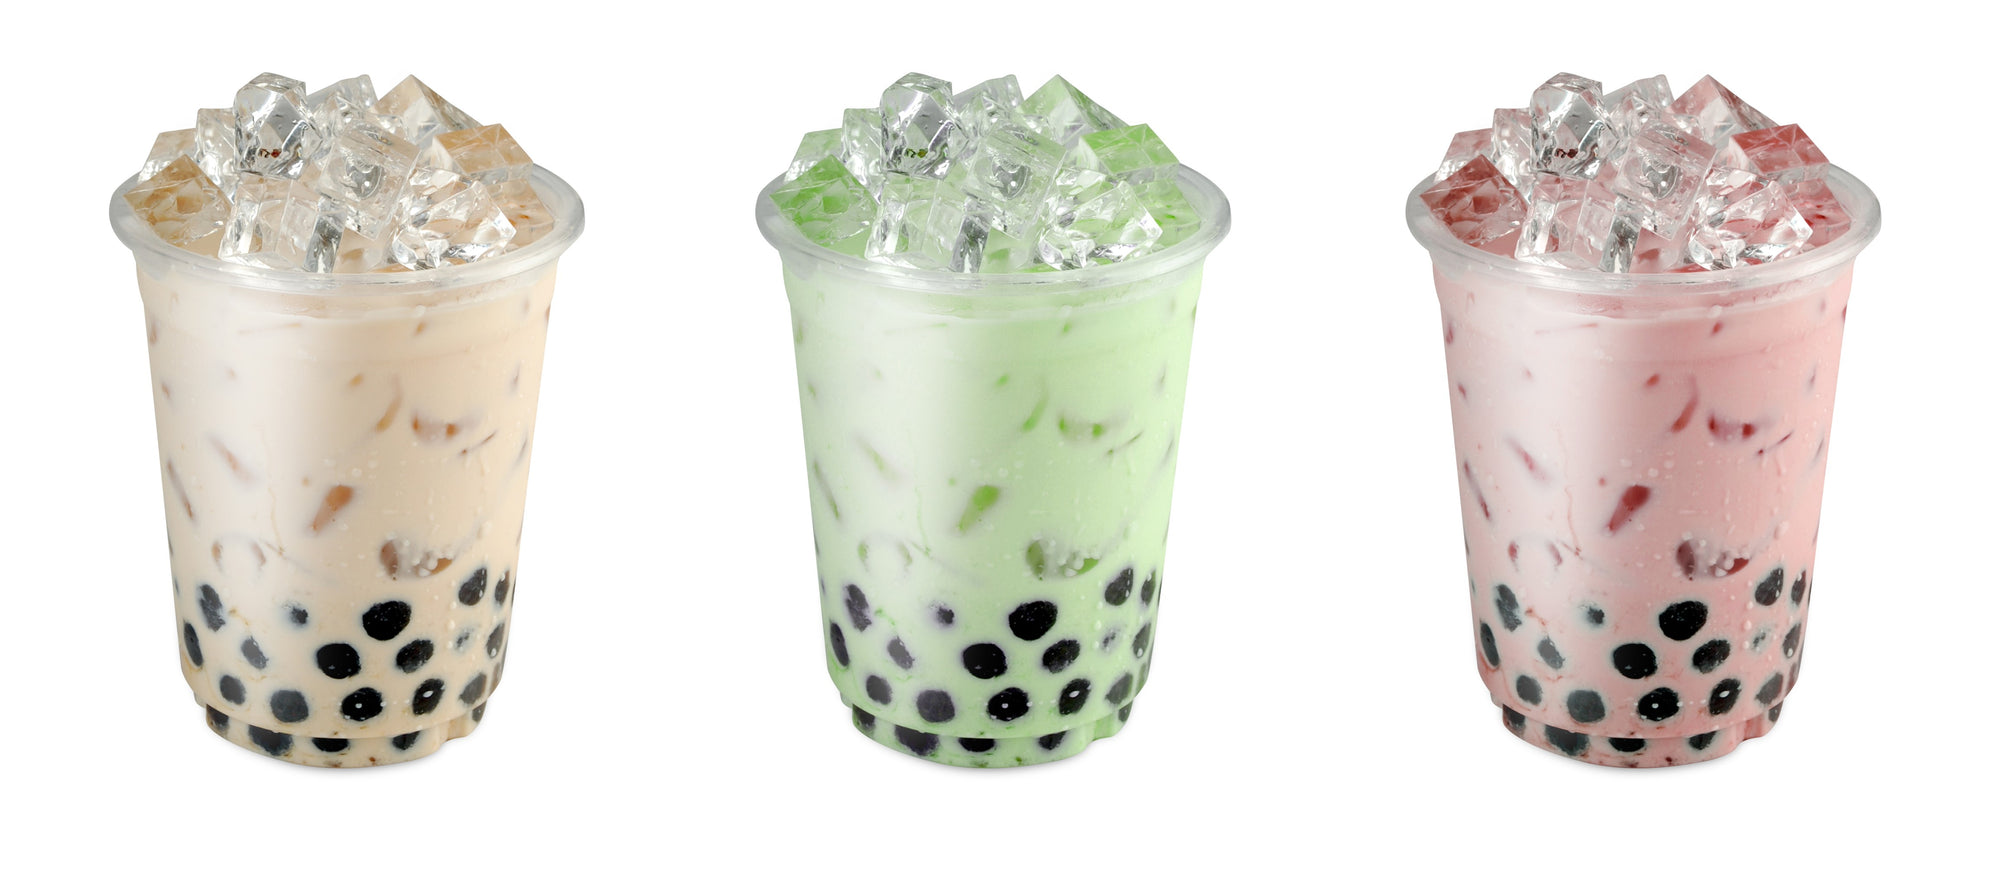 Ice Cold vs Hot Bubble Tea: What's Best for You?